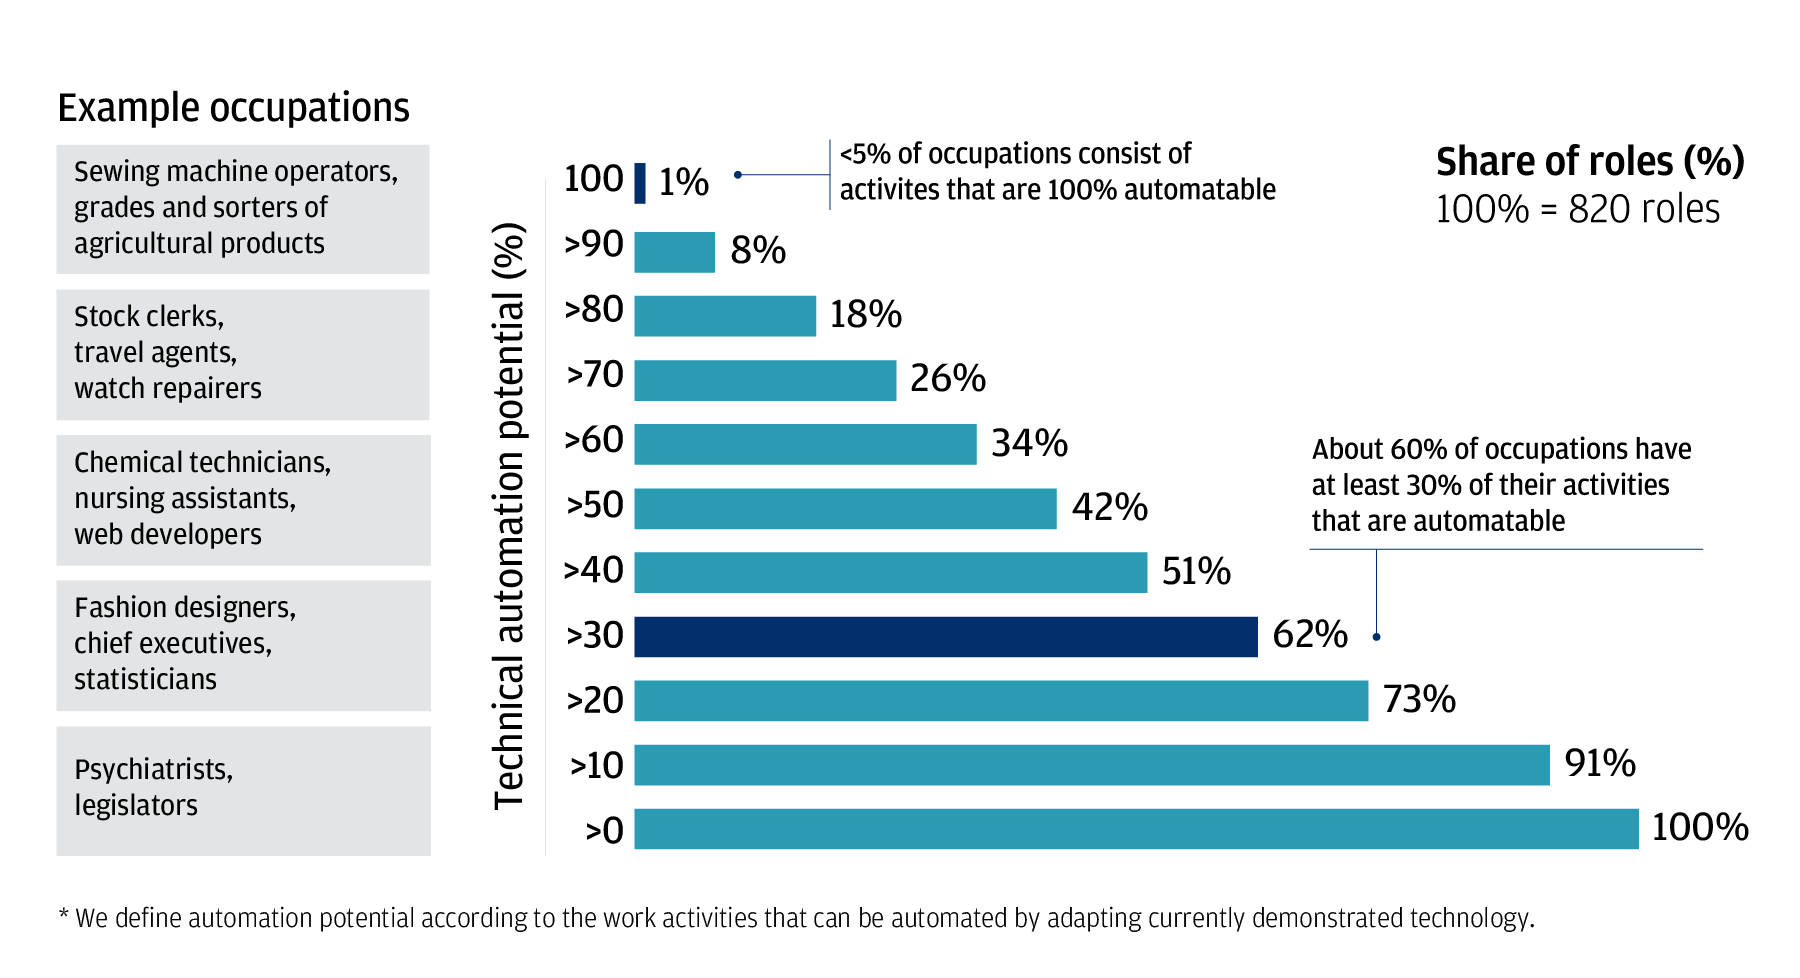 This chart shows the potential for automation across industries. The data is broken down into 10 categories based on the percentage of technical automation potential. The data show that about 1% of all occupations consist of activities that have the potential for 100% automation; 8% of occupations have a 90% or greater potential for automation; 42% of occupations have a 50% or higher potential for automation; 91% of all occupations have activities that are 10% automatable or more.